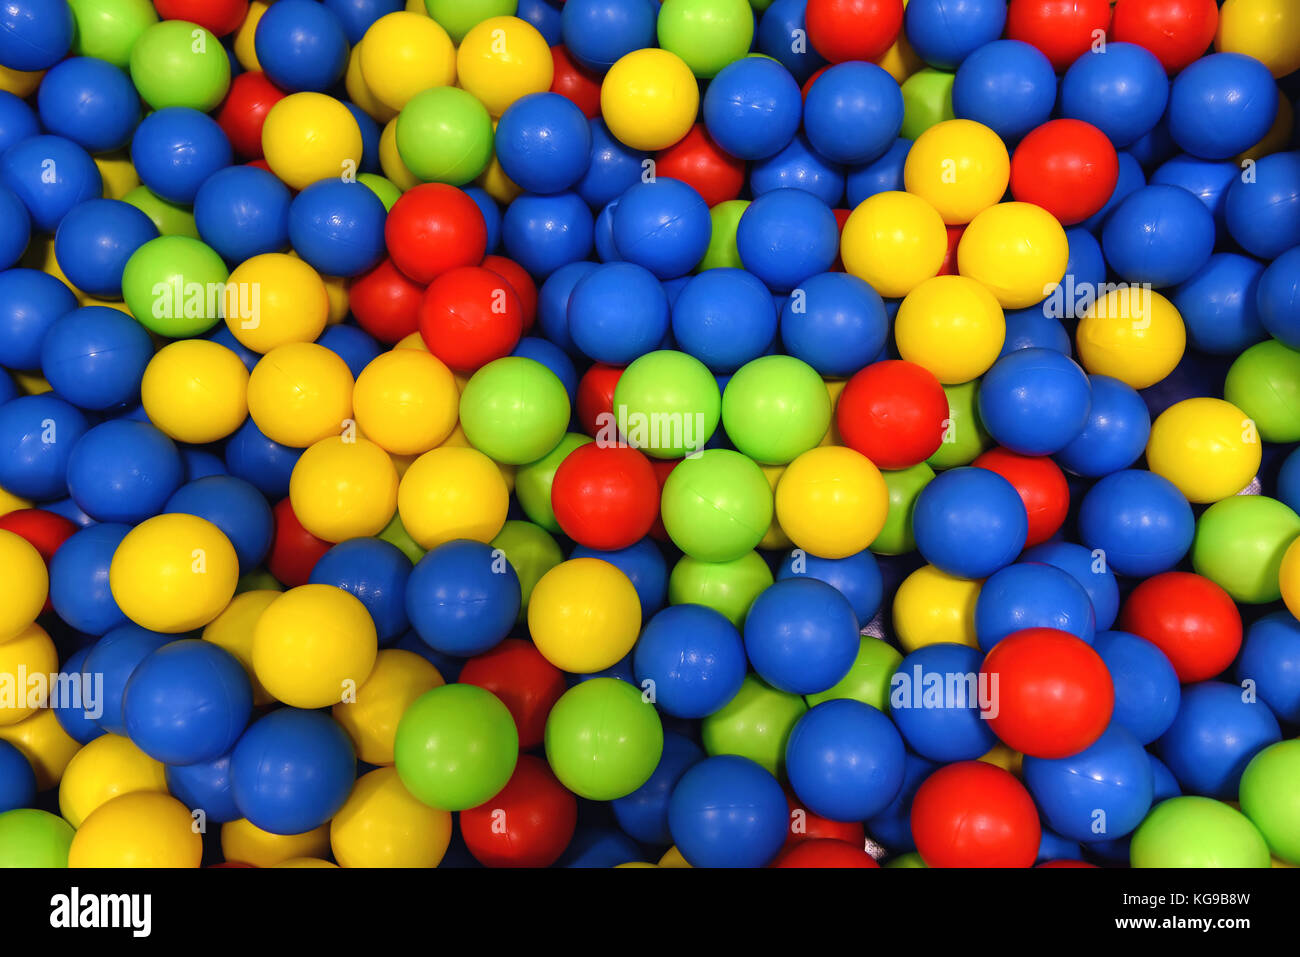 Colorful balls for kids games.  Fun and safe, kids play in the middle. Very popular in kindergartens and playrooms. Ideal photo for backgrounds. Stock Photo